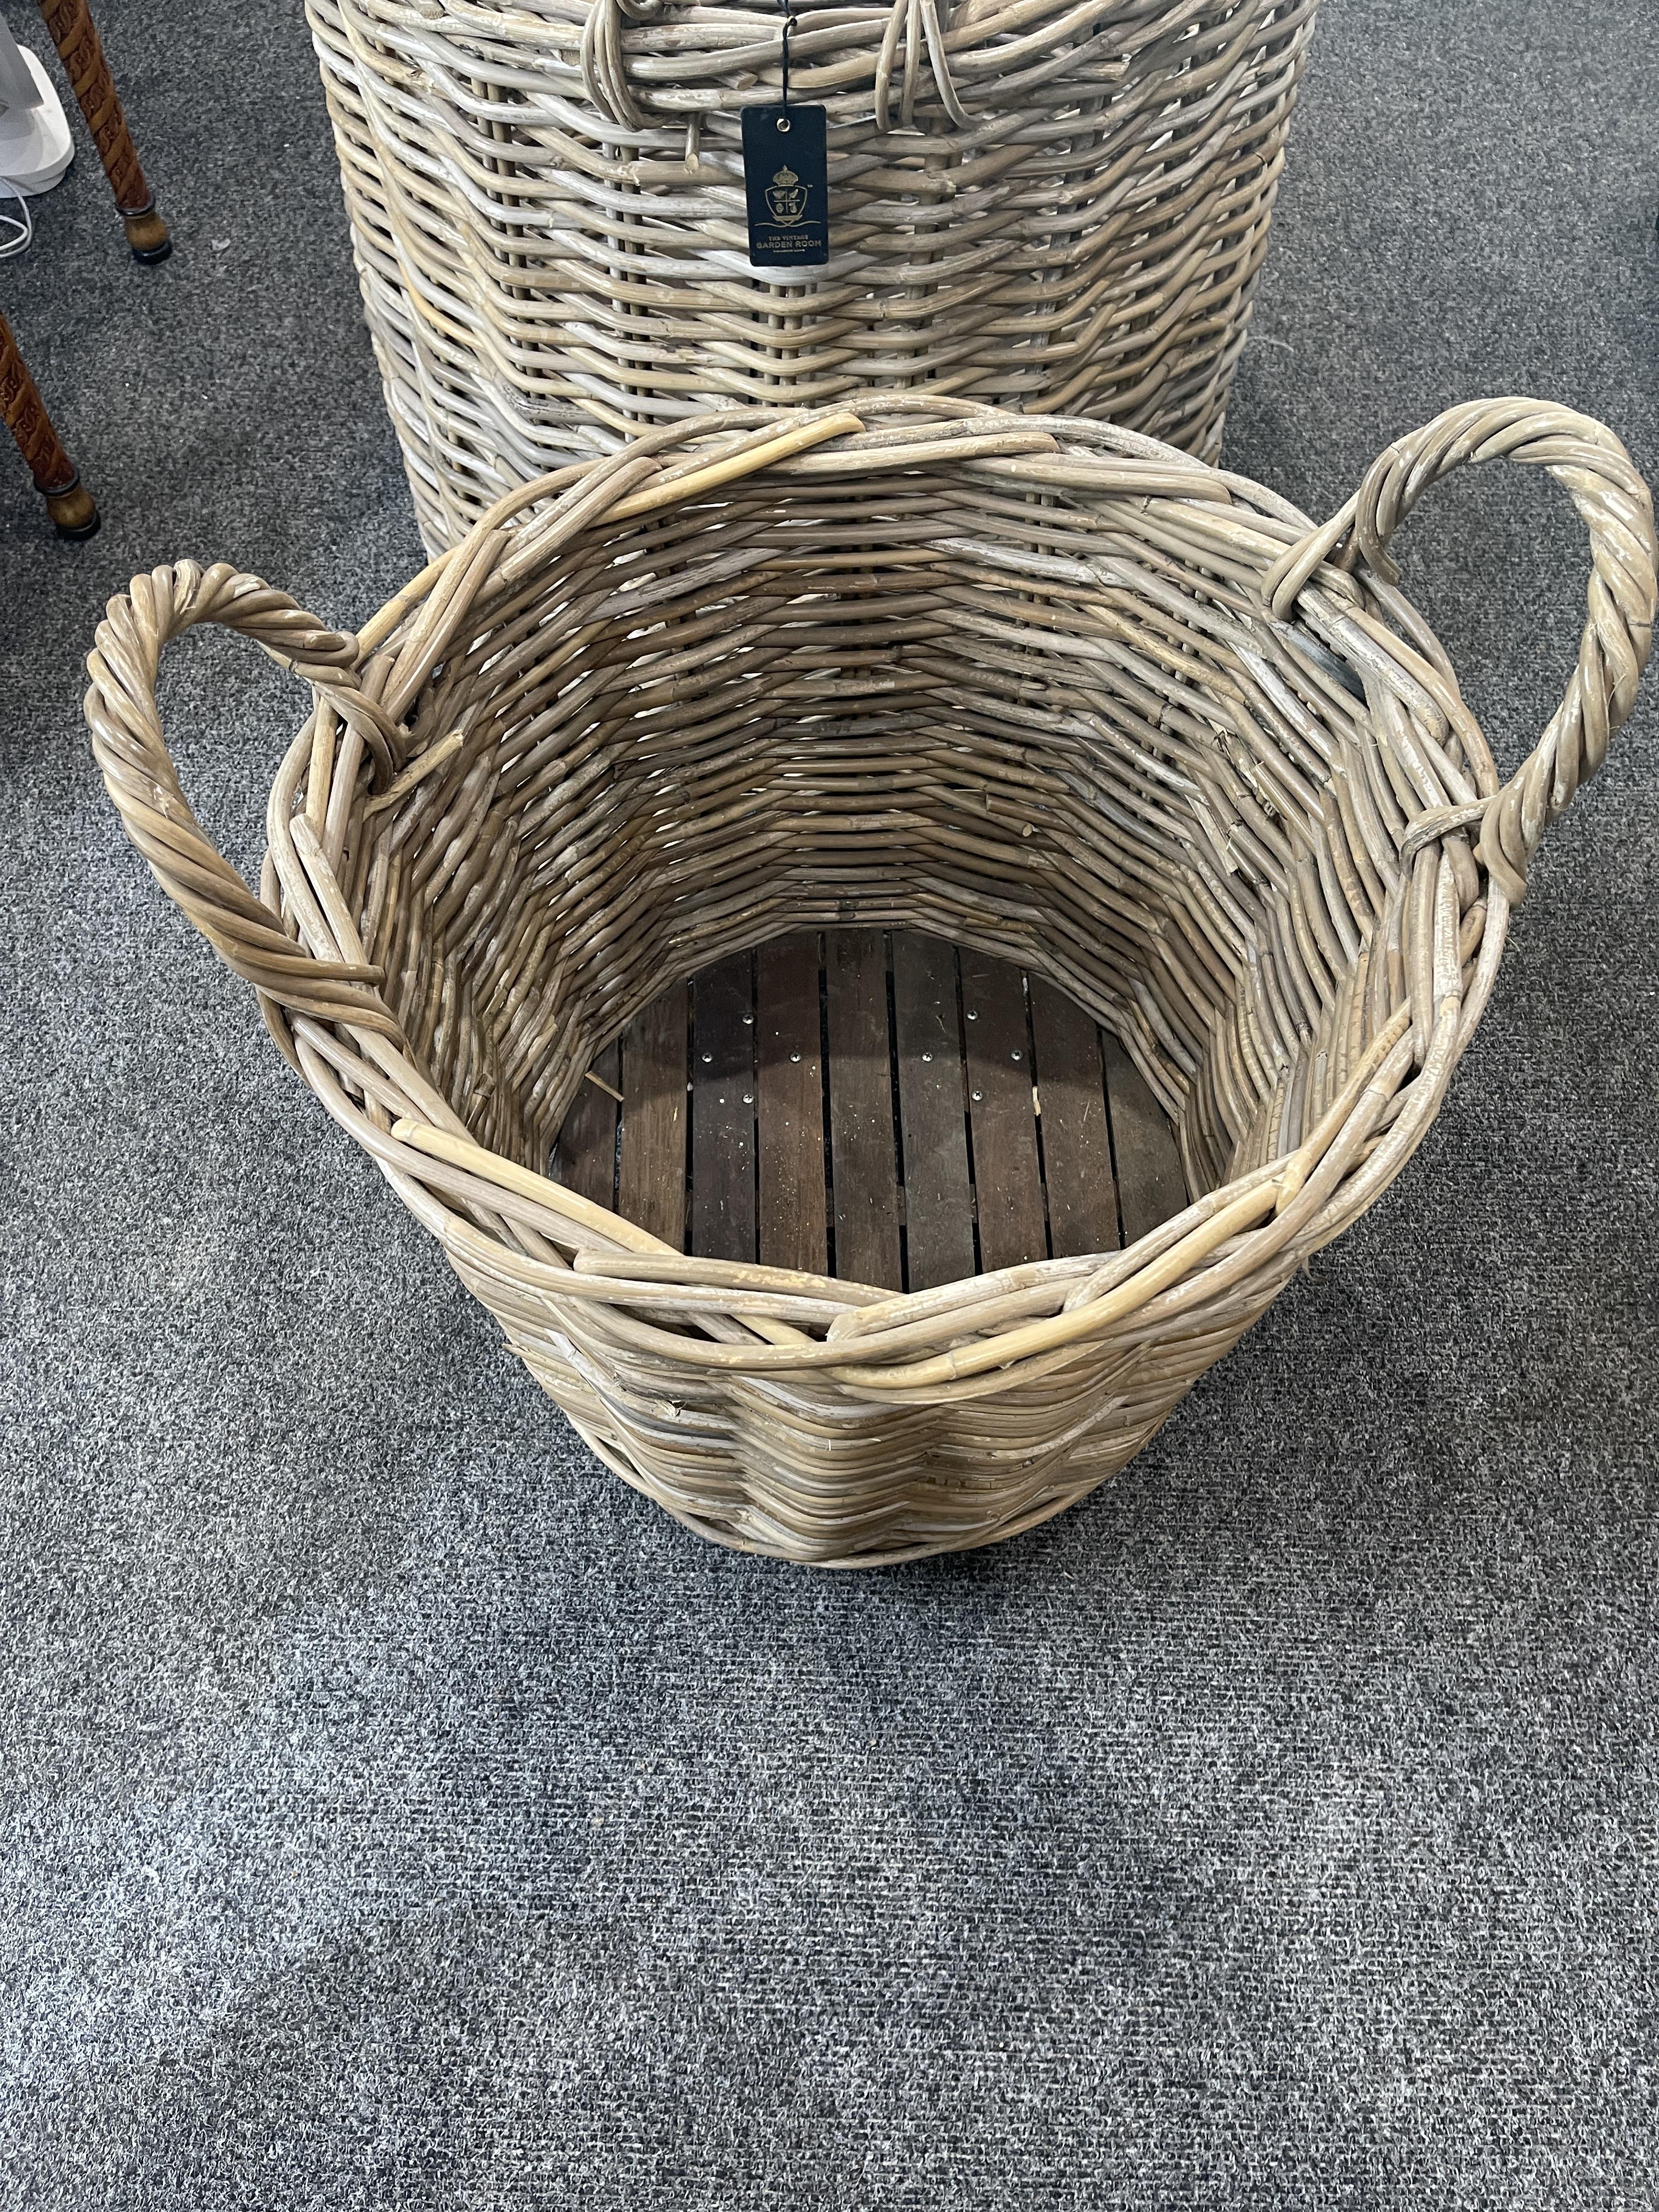 Two Large Vintage Wicker Baskets / Garden Rooms. - Image 3 of 7